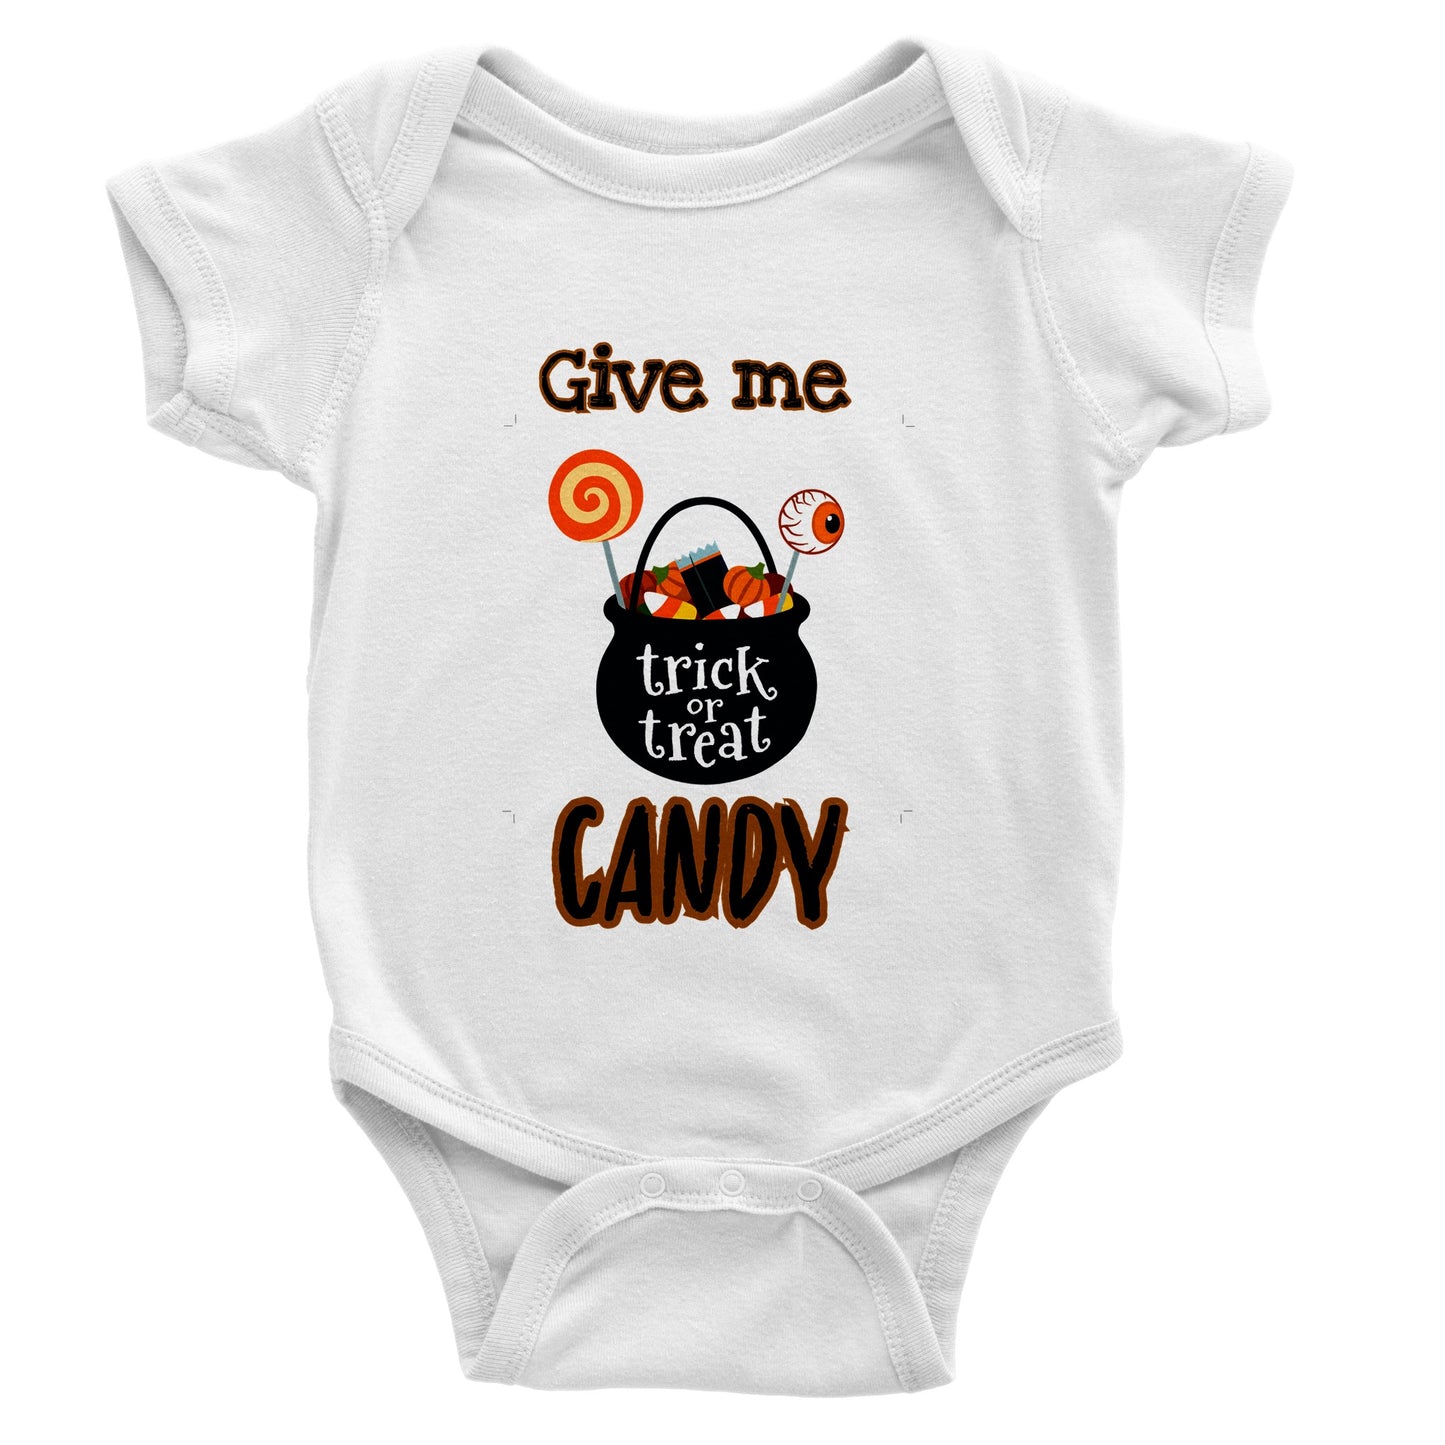 Give me candy -Classic Baby Short Sleeve Bodysuit